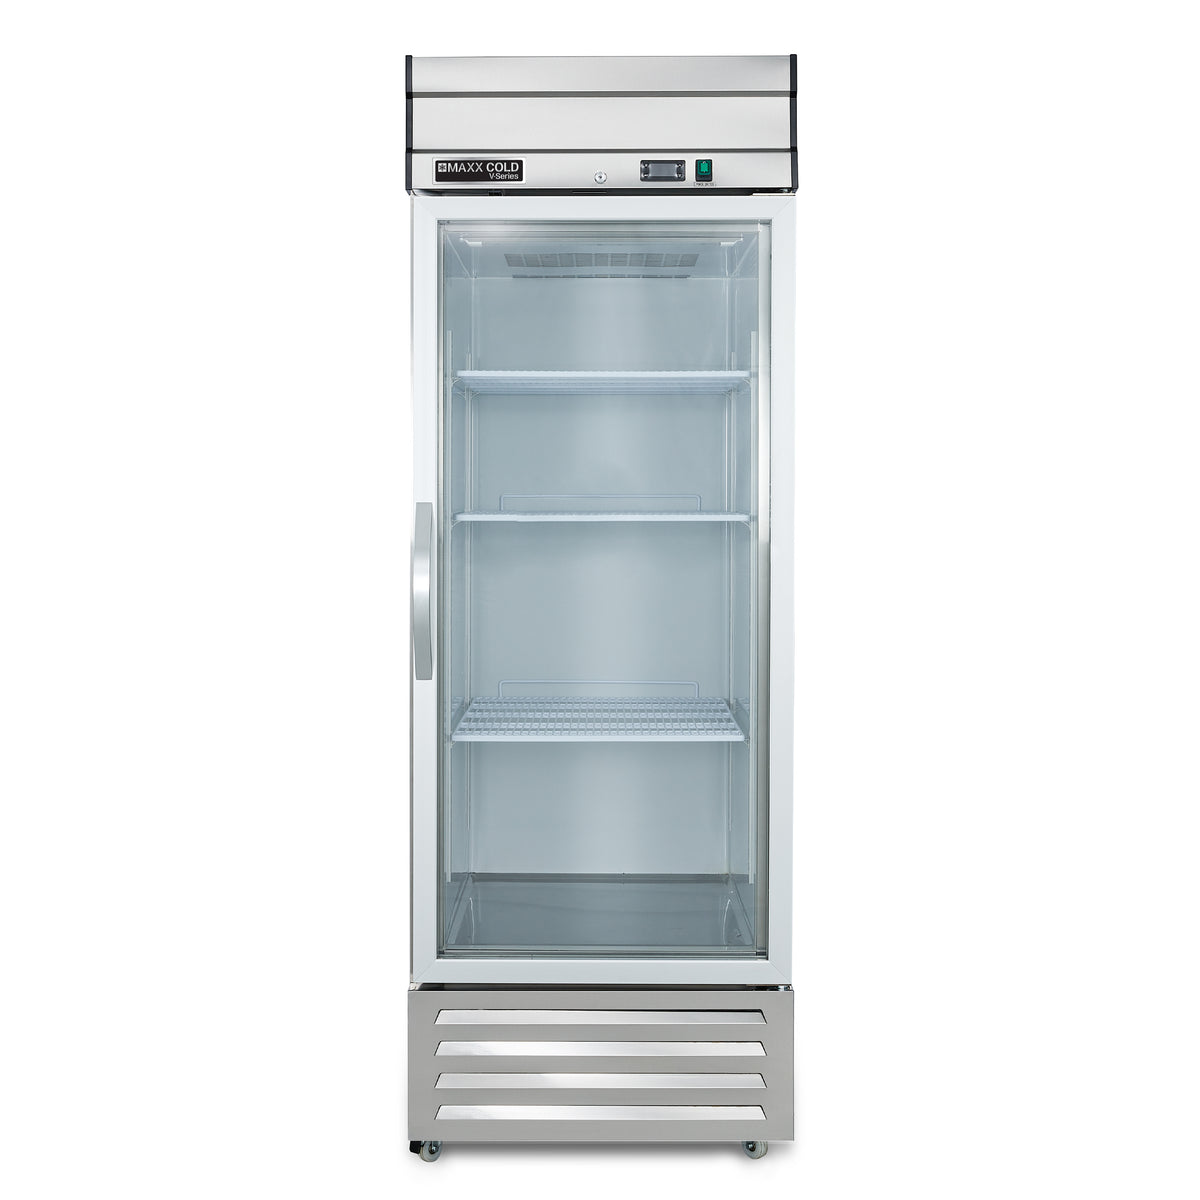 Maxx Cold MVR-23GD V-Series 1 Glass Door Reach-In Refrigerator, Bottom Mount, 27"W, 19 cu. ft. Storage Capacity, in Stainless Steel (MVR-23GDHC)